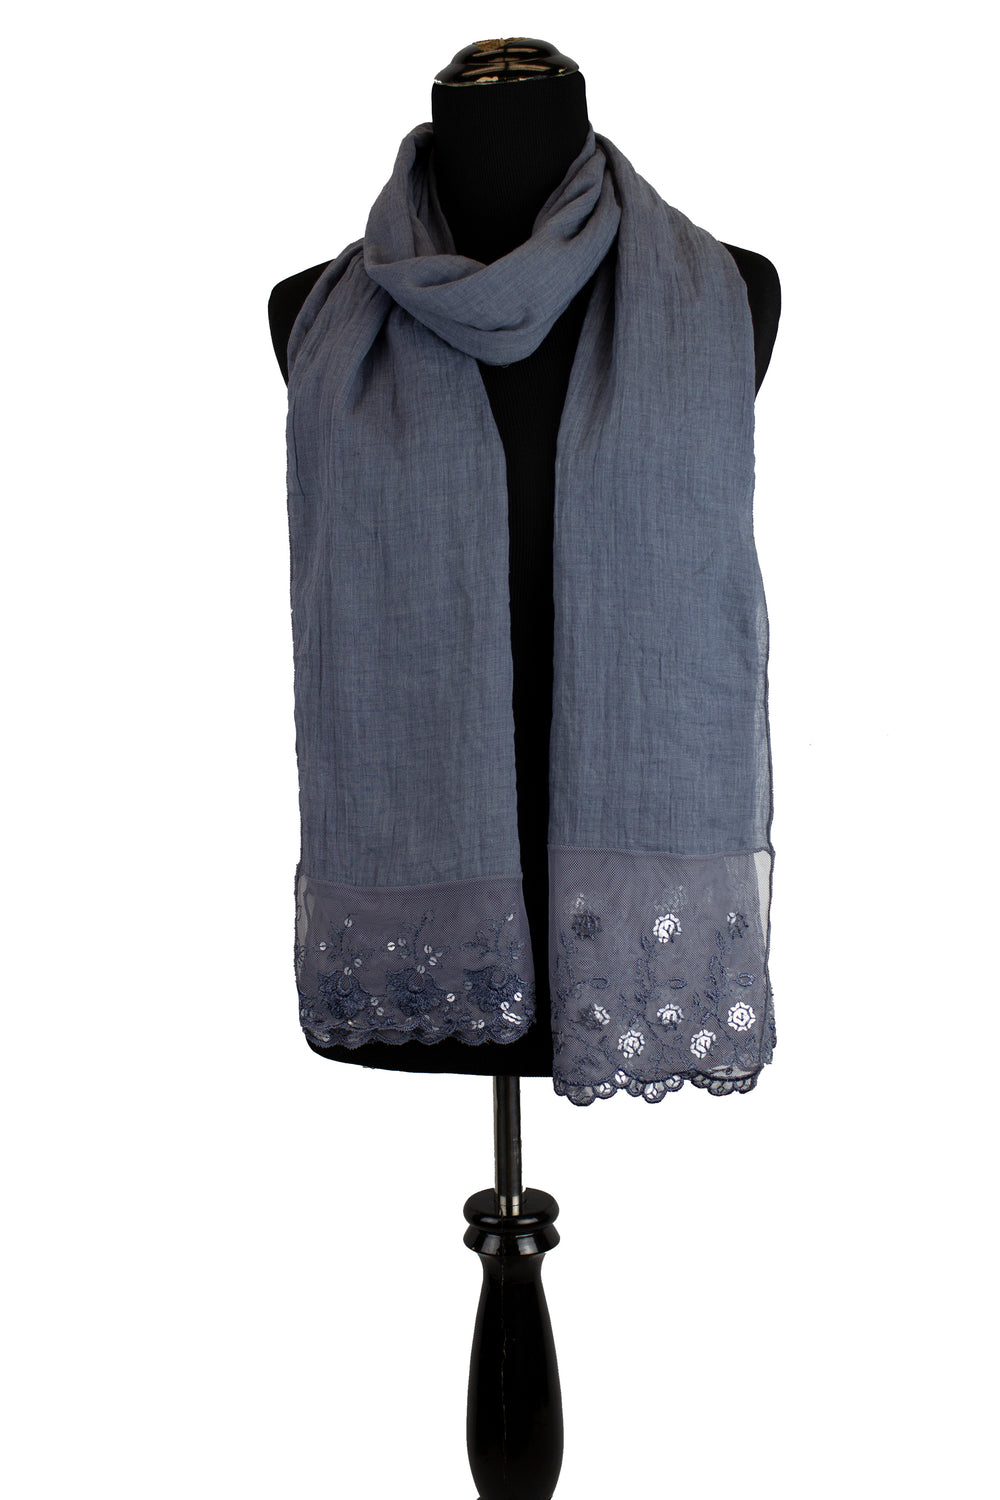 denim blue viscose hijab with lace ends and sequins on the lace